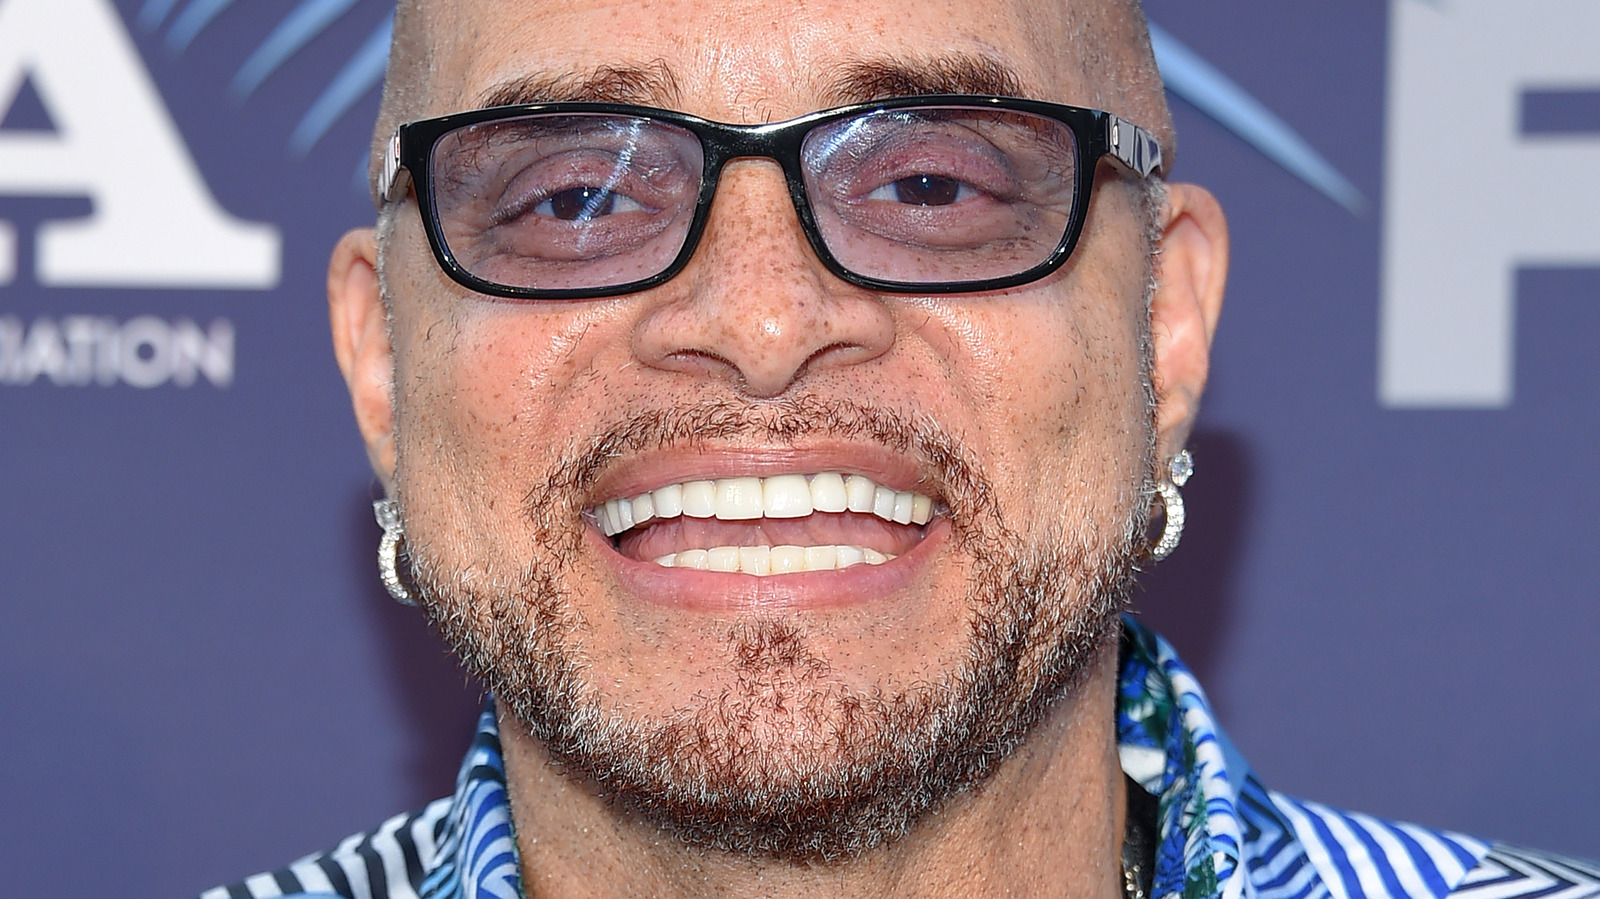 Sinbad's Family Announces Health Update Two Years After Stroke